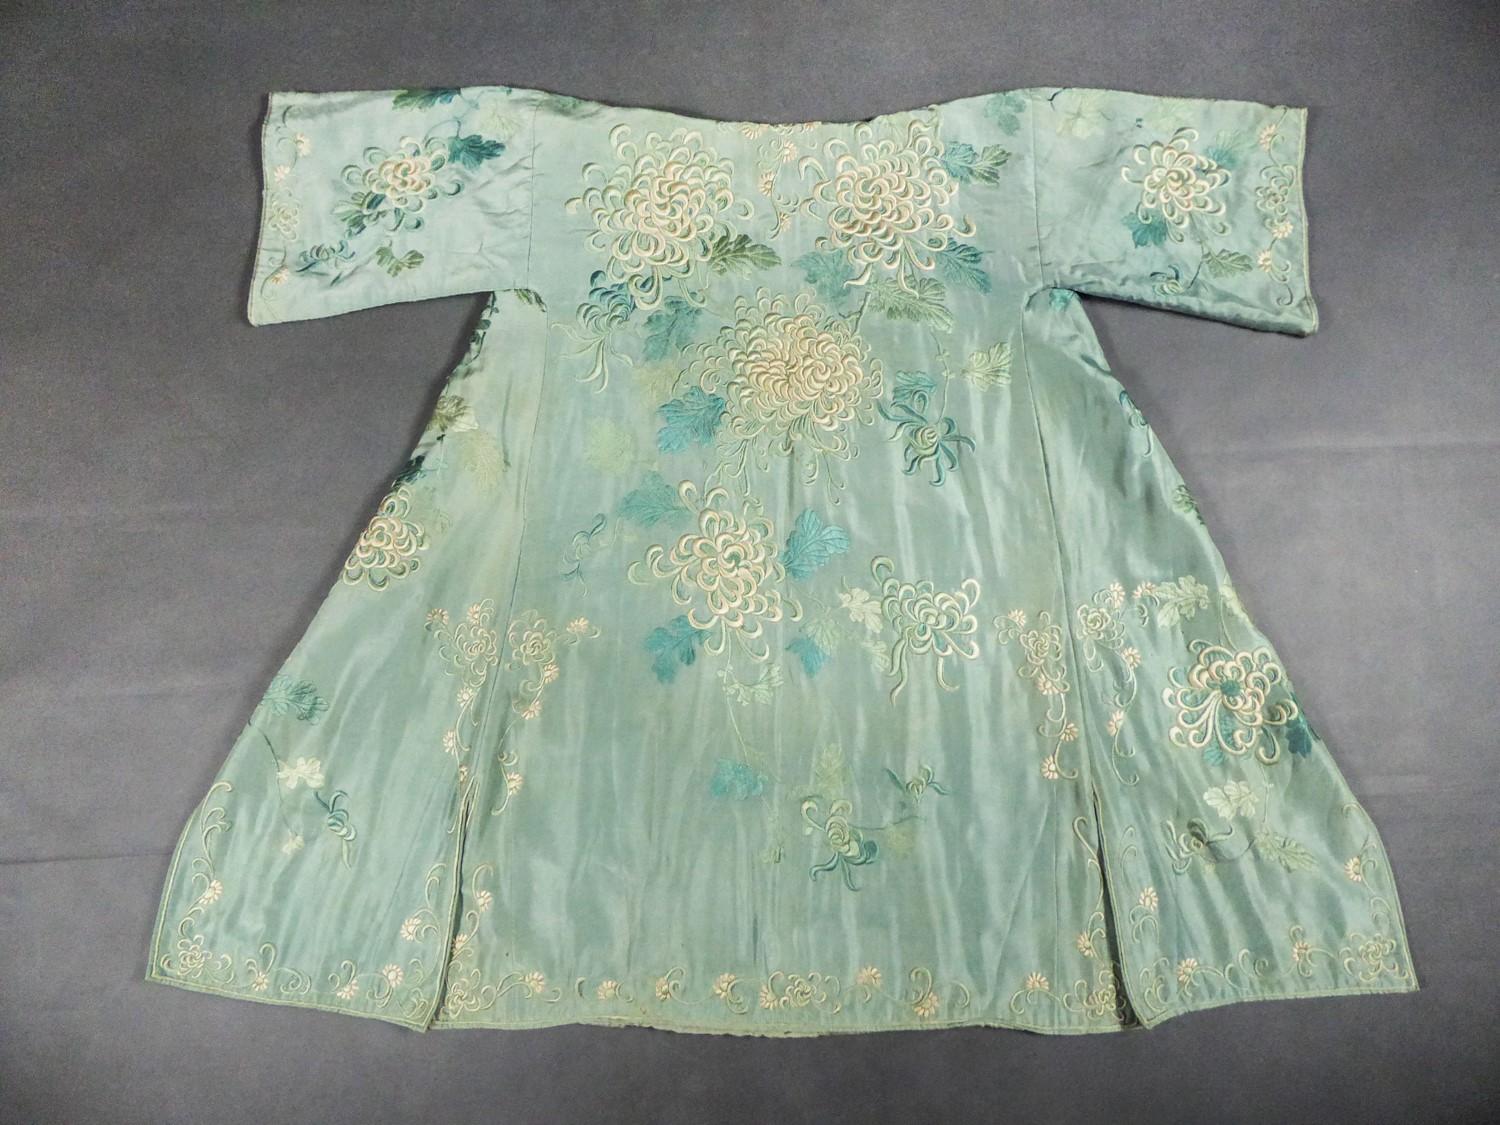 Circa 1900/1930
Japan for fashion in Europe

Exceptional evening coat or Kimono in embroidered silk crepe made in Japan for Fashion in Europe between 1900 and 1930 corresponding to the vogue of Japonism. Mandarin style cut from the Chinese Qing